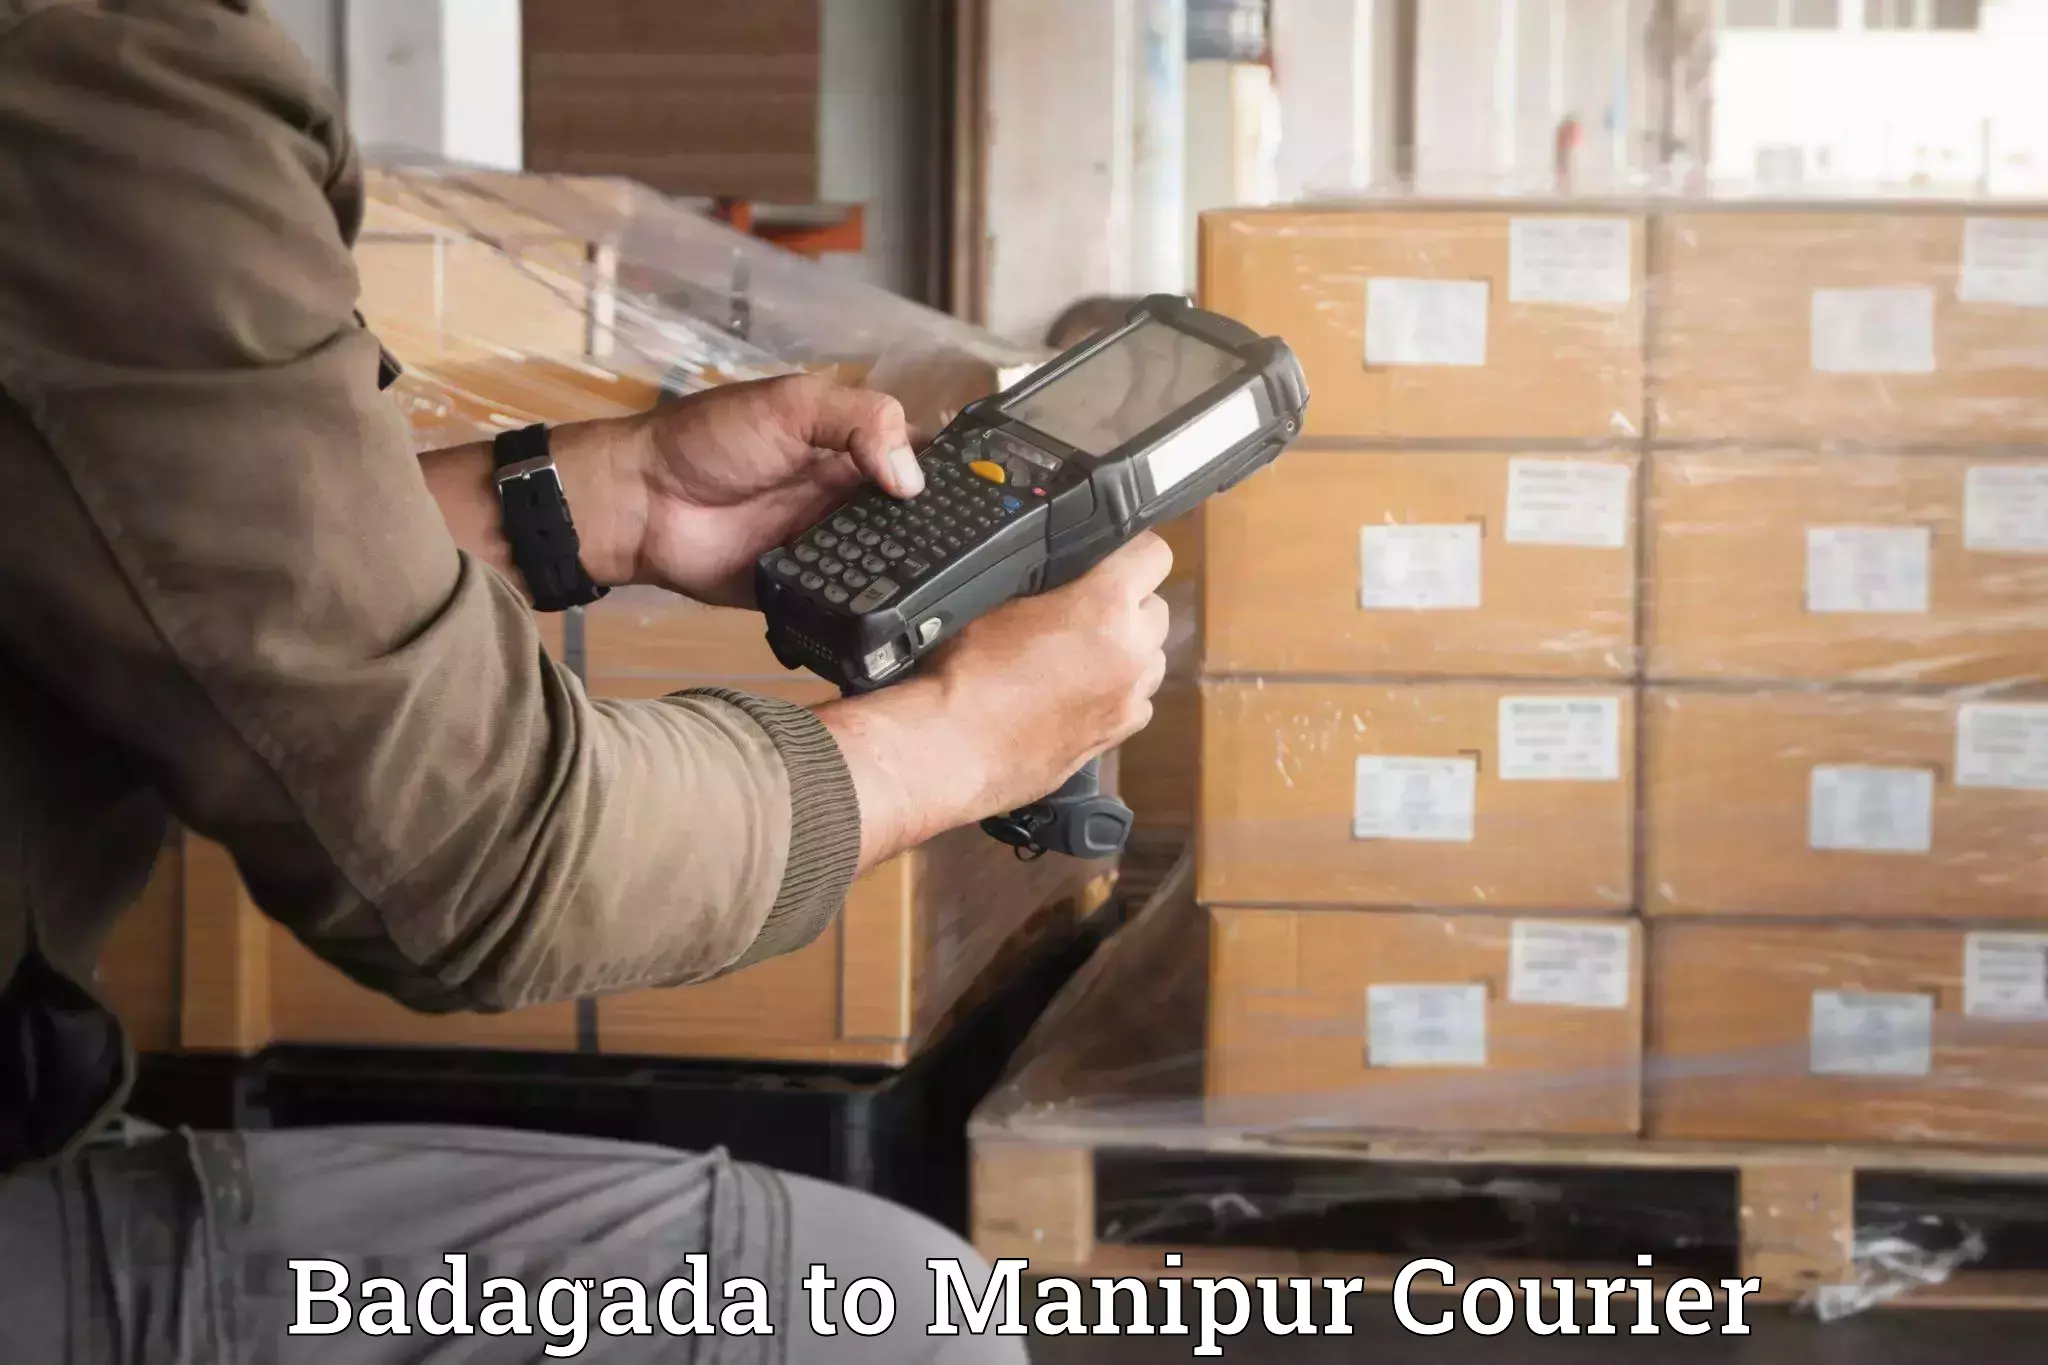 Comprehensive household relocation in Badagada to Manipur